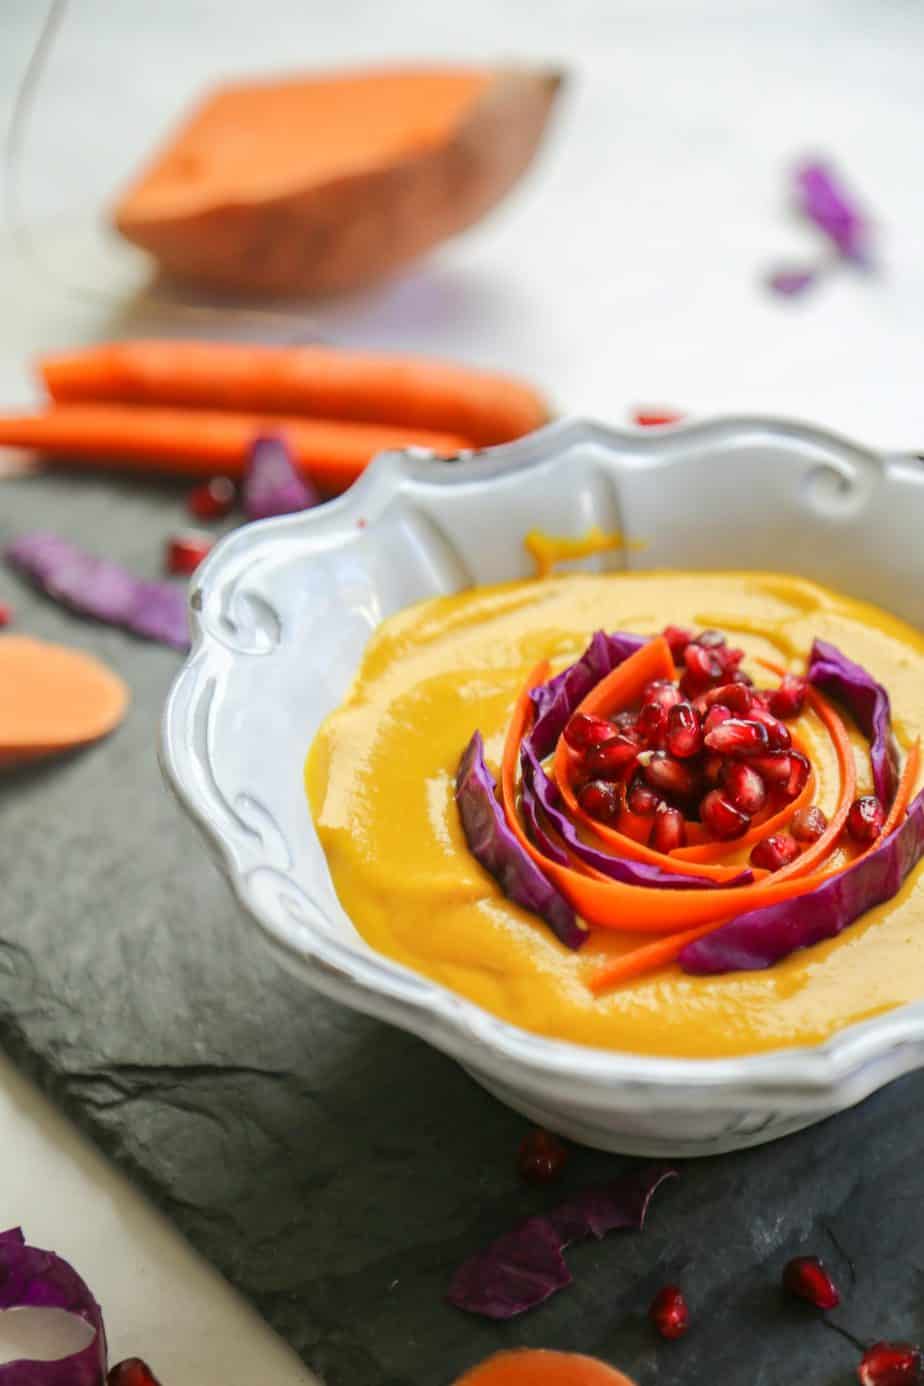 a bowl of bright yellow soup topped with purple cabbage, carrots and pomegranate seeds